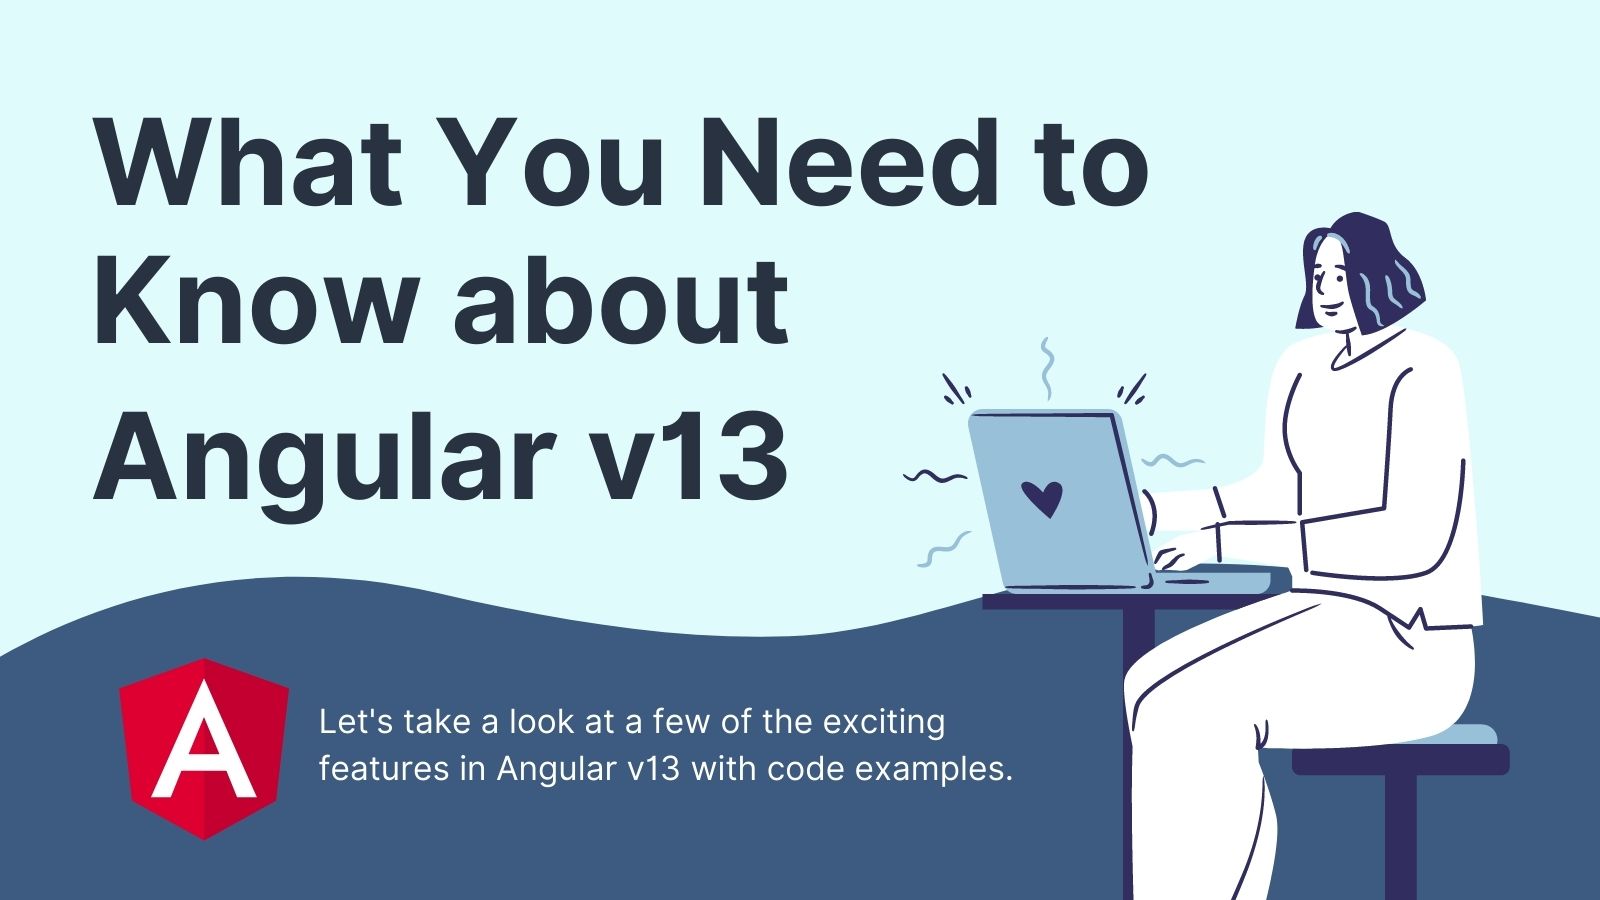 What You Need to Know about Angular v13